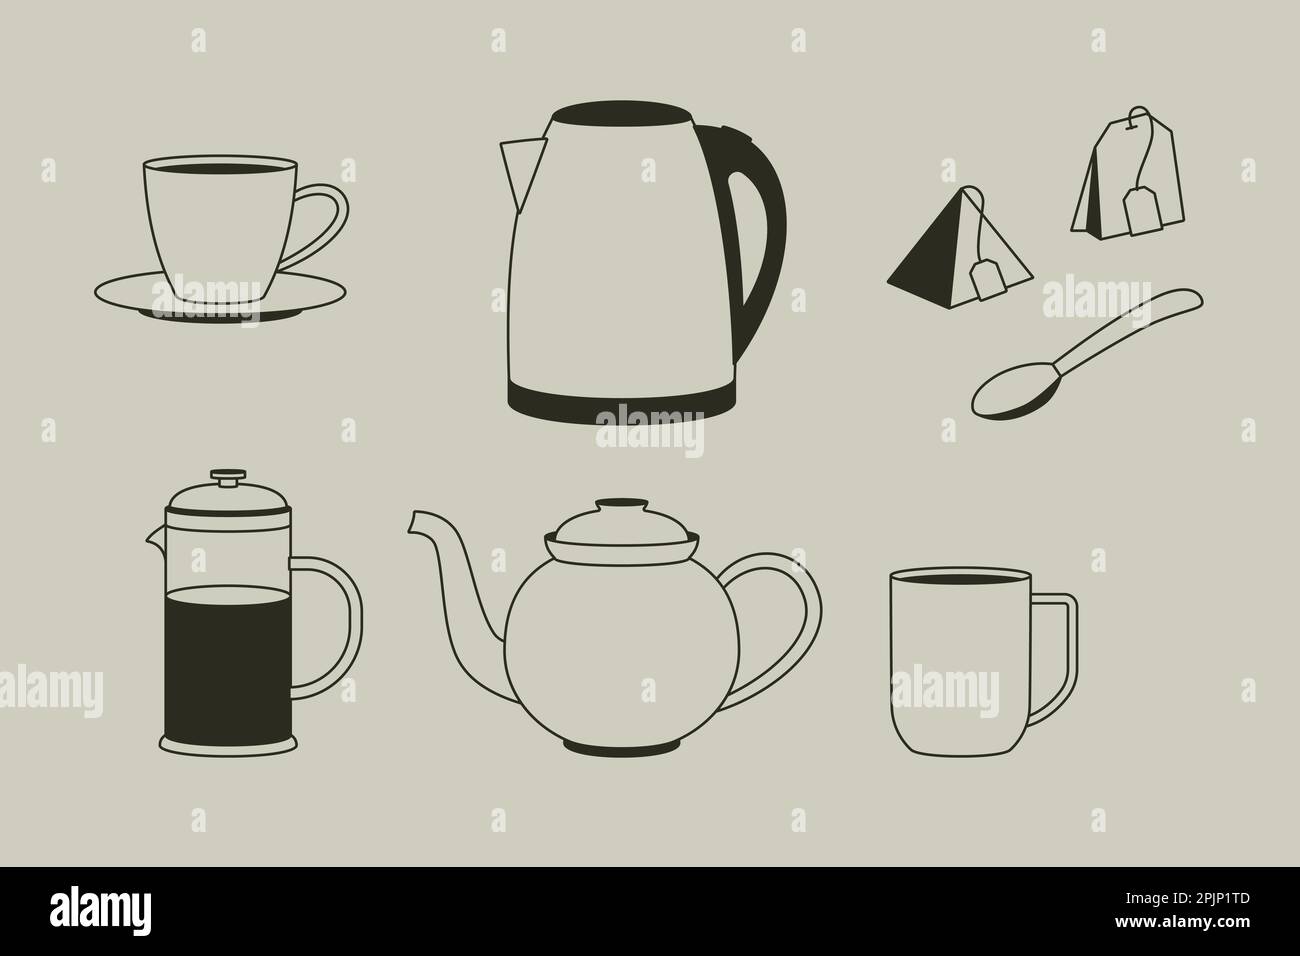 Set of appliances for tea brewing and drinking. Kettle, brewer, teapot, mug and cup. Empty and full french press. Outline vector illustration Stock Vector